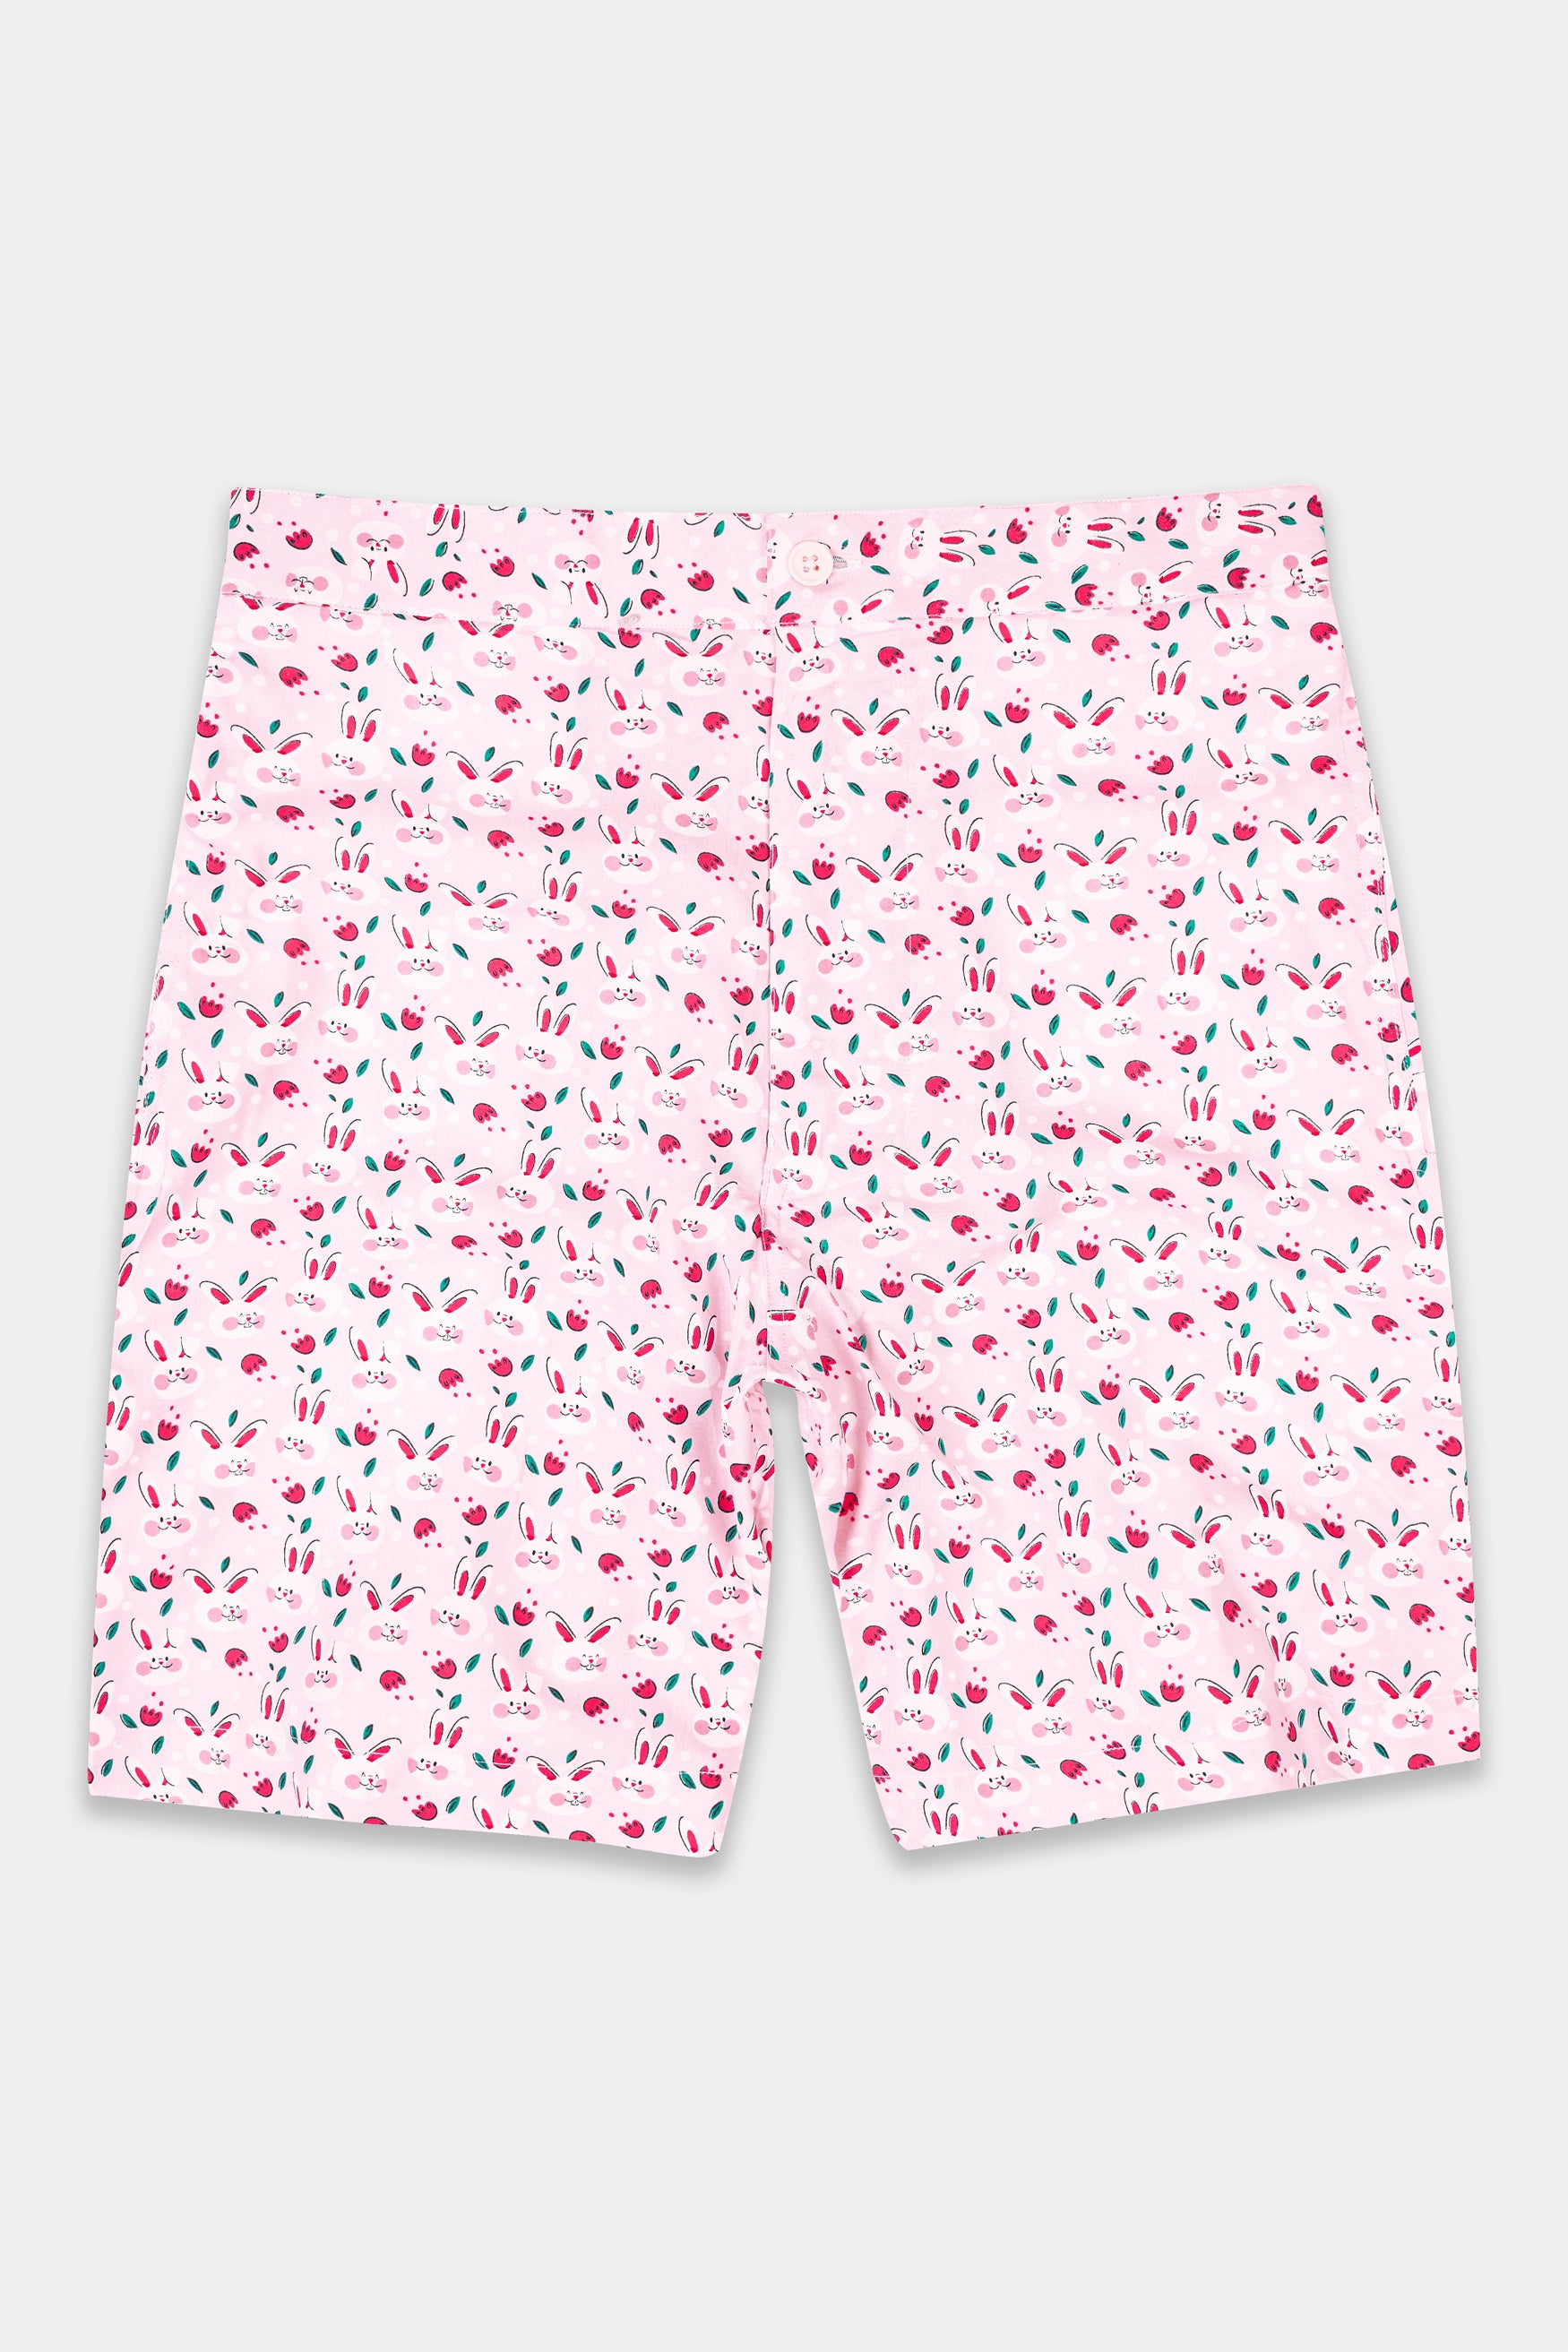 Melaine Pink with Multicolor Rabbit Printed Premium Cotton Shorts SR354-28,  SR354-30,  SR354-32,  SR354-34,  SR354-36,  SR354-38,  SR354-40,  SR354-42,  SR354-44